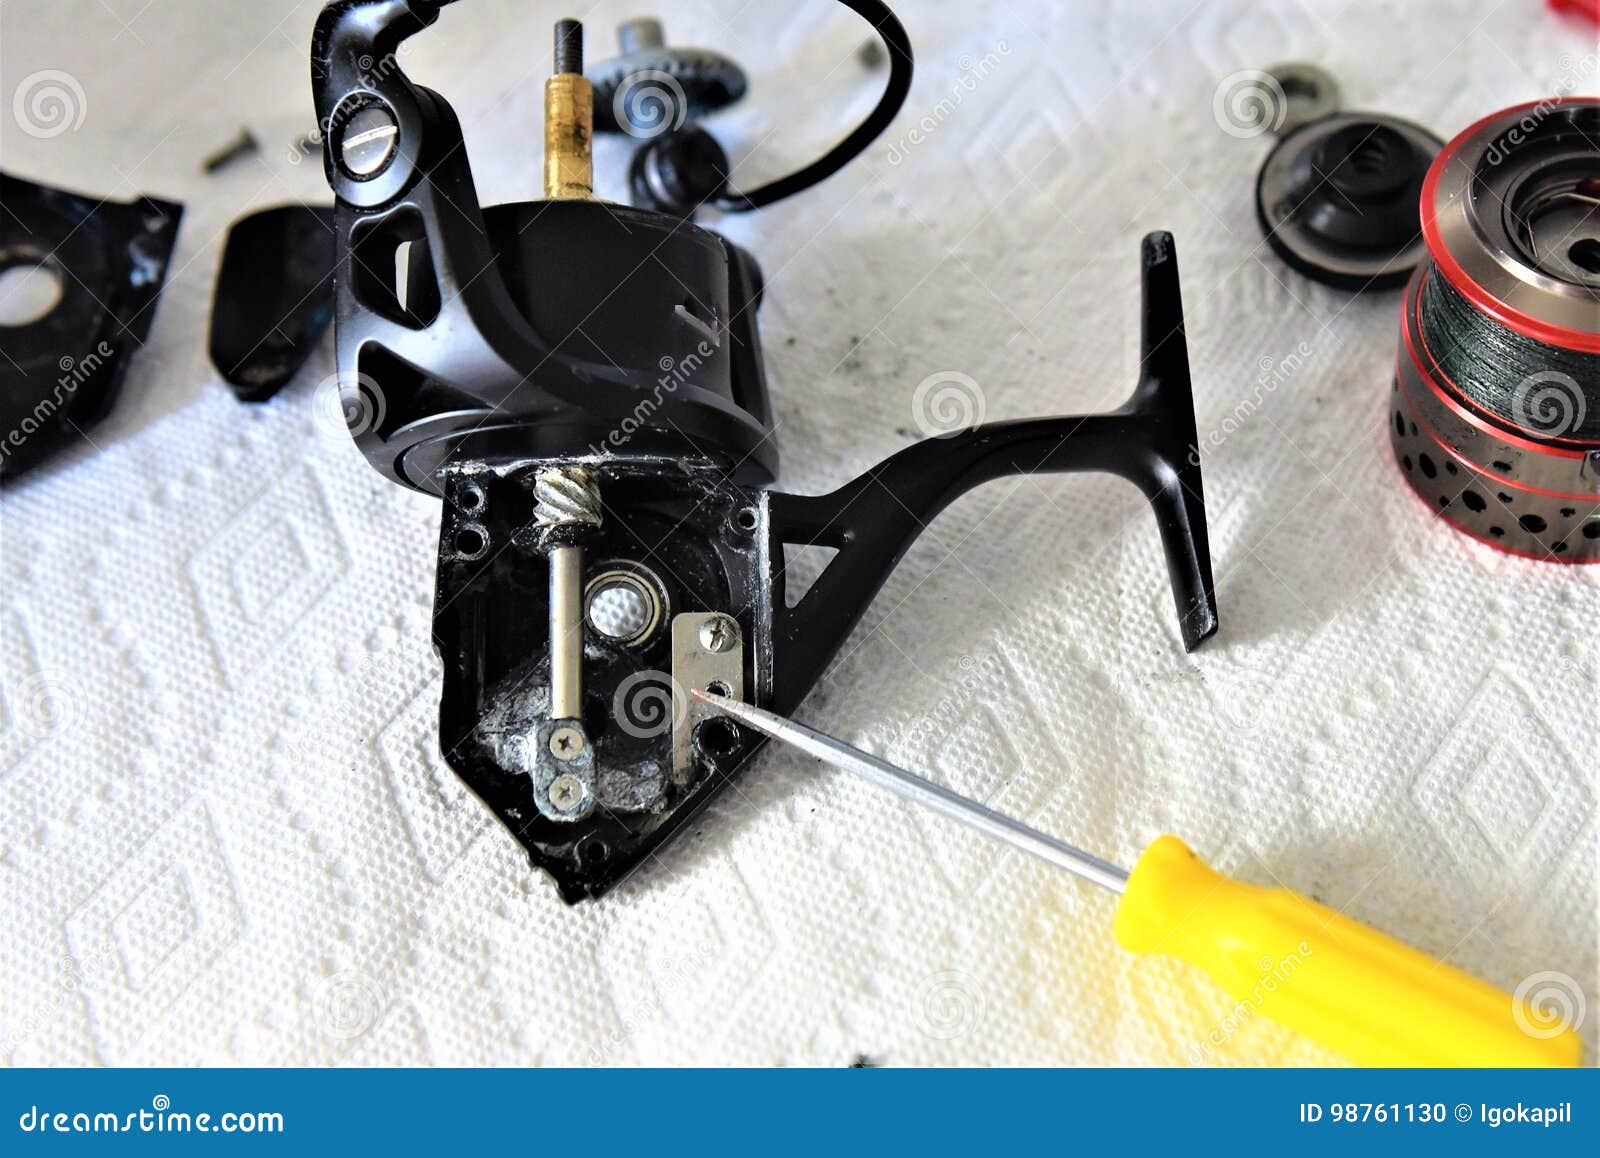 Fishing Reel Disassembled Parts after Cleaning Stock Photo - Image of  metal, disassembled: 98761130